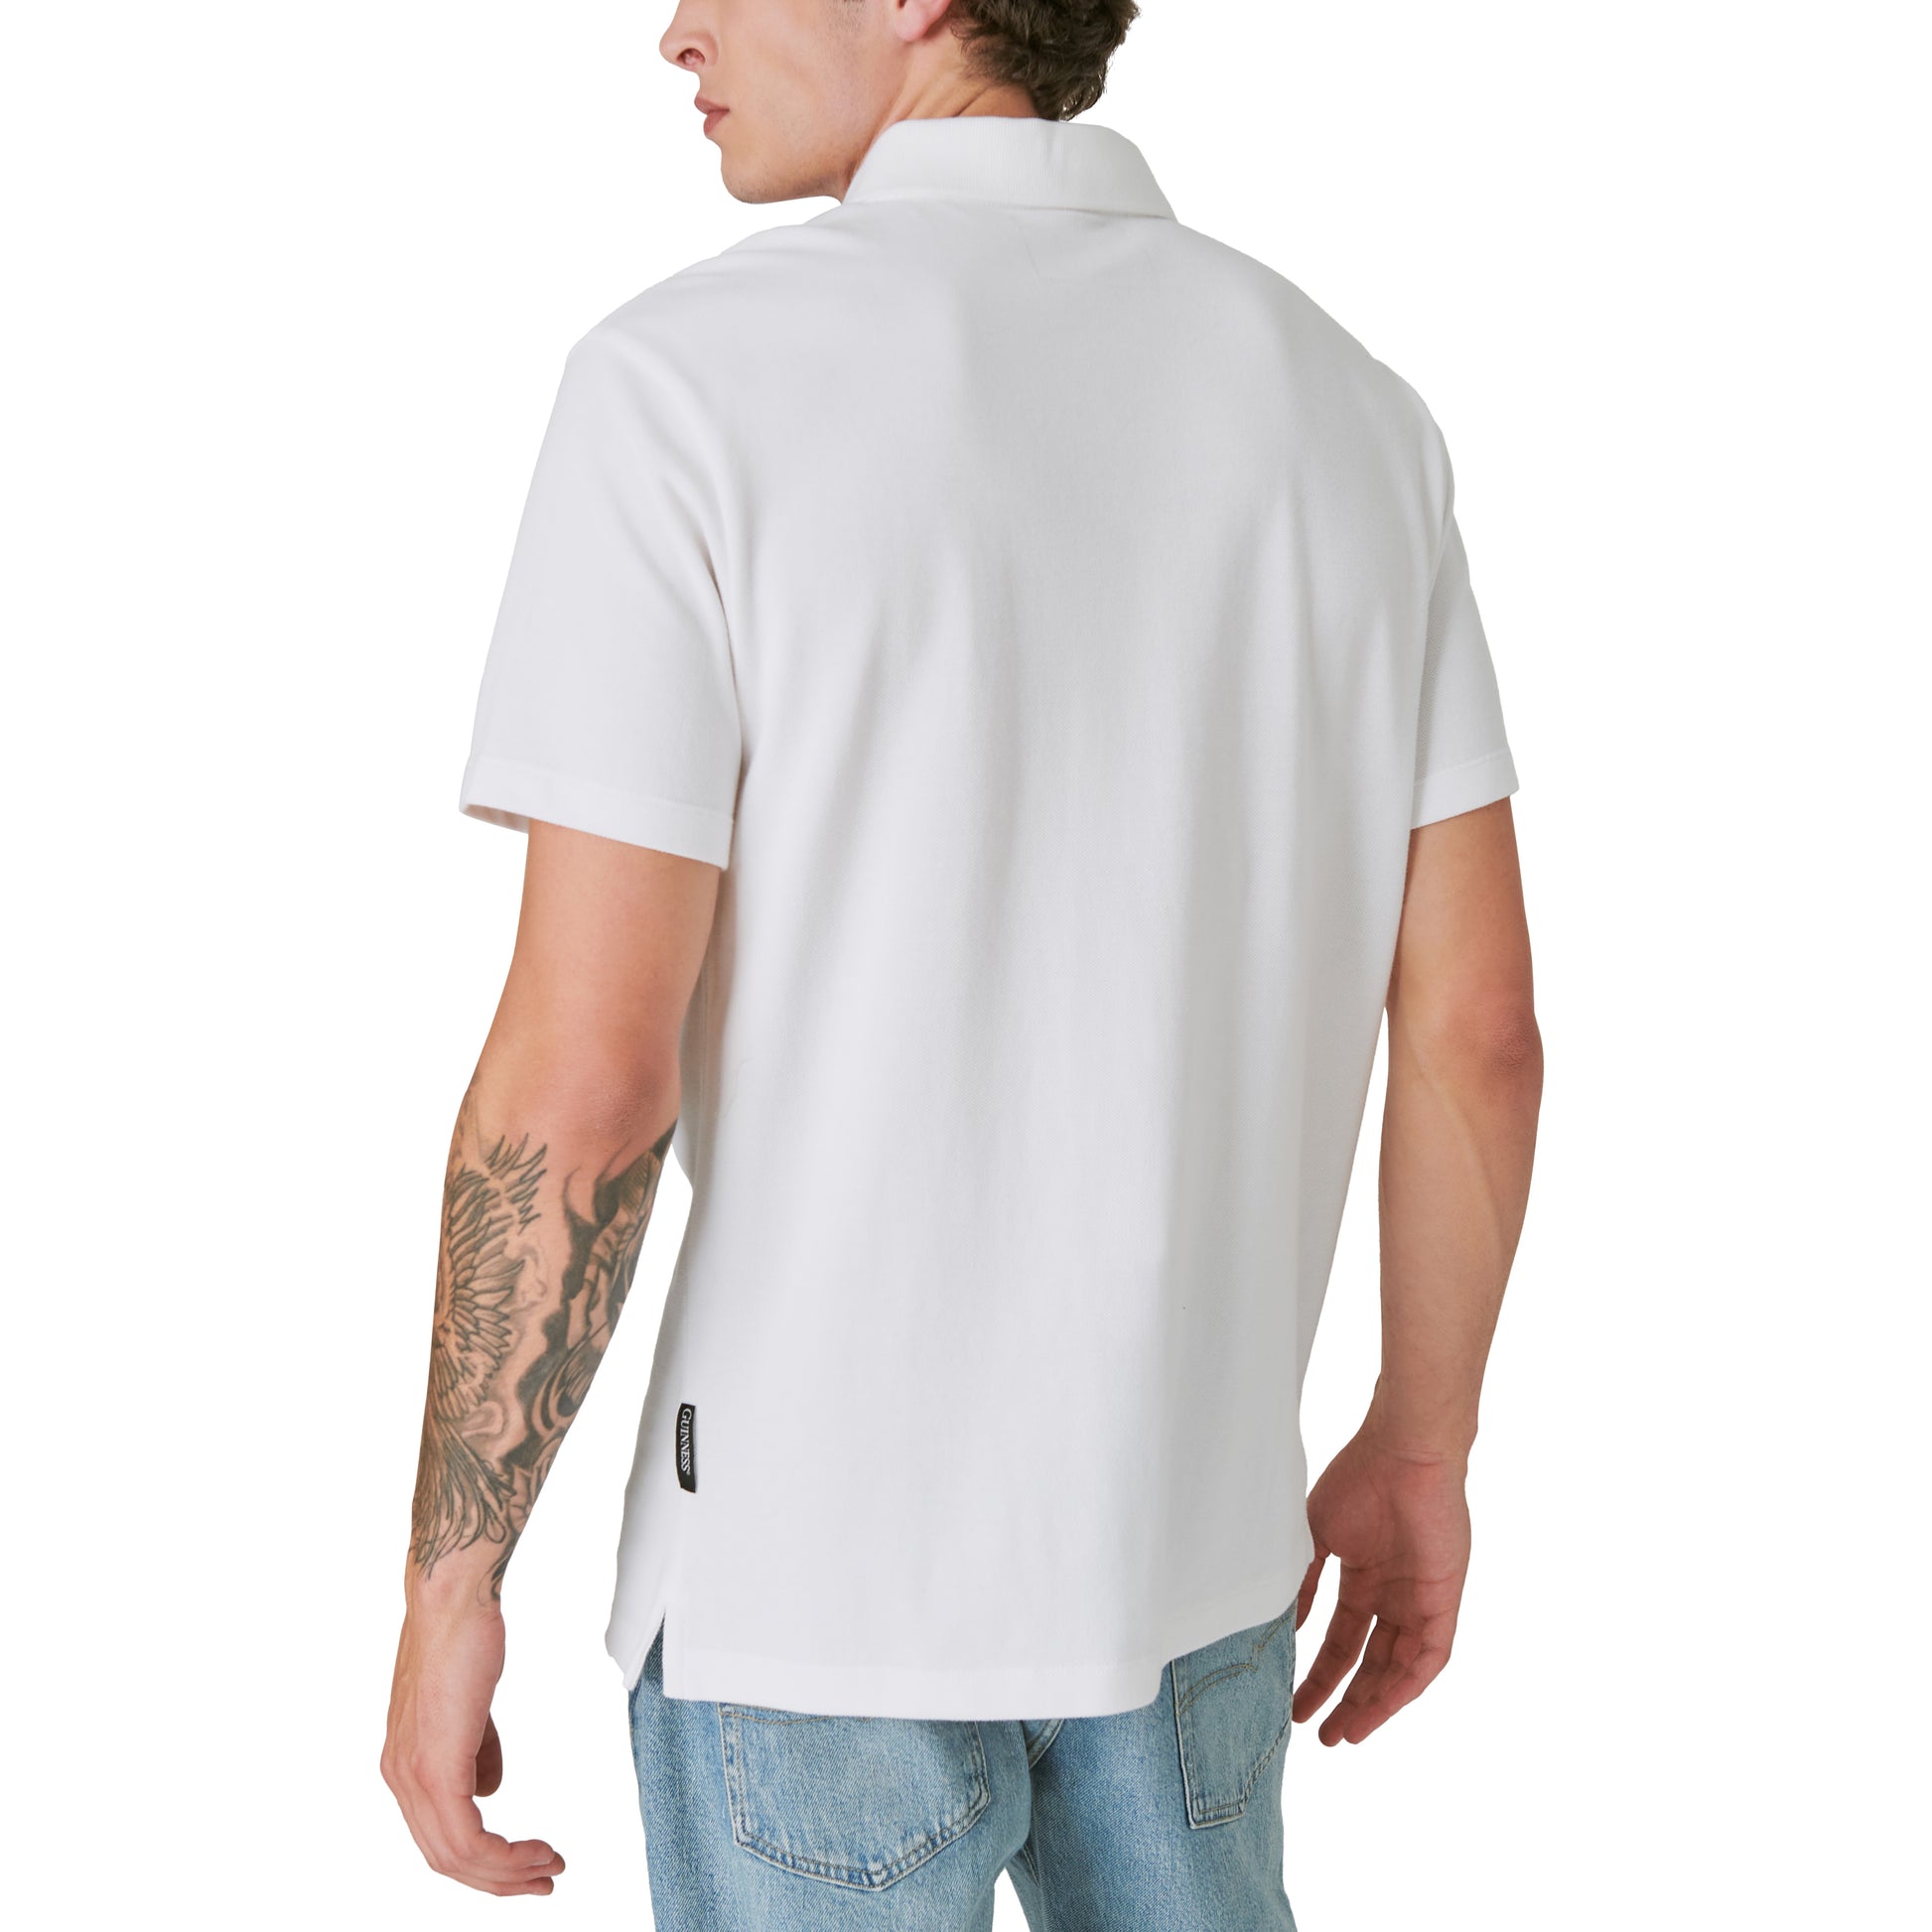 The limited edition Guinness Polo - Bright White showcases the back view of a man wearing a white polo shirt.